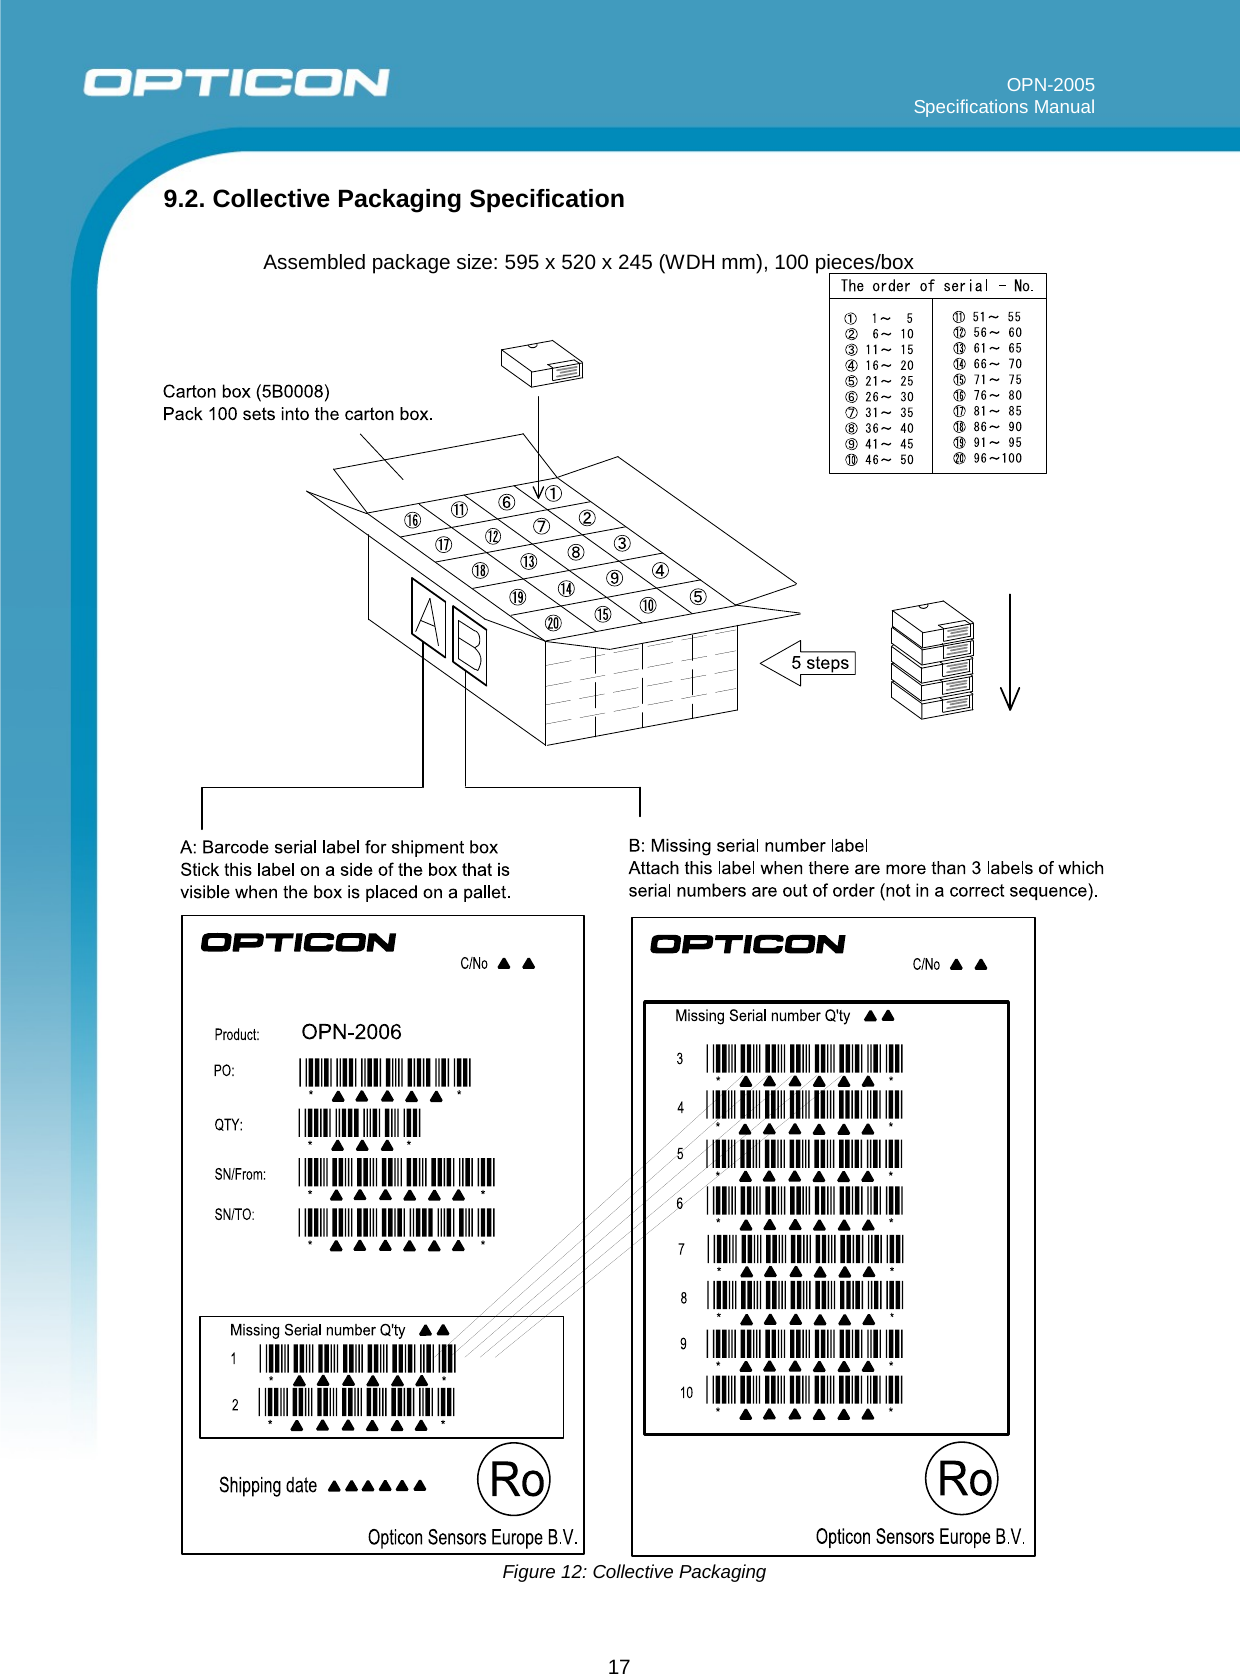 17 OPN-2005 Specifications Manual    9.2. Collective Packaging Specification  Assembled package size: 595 x 520 x 245 (WDH mm), 100 pieces/box  Figure 12: Collective Packaging 